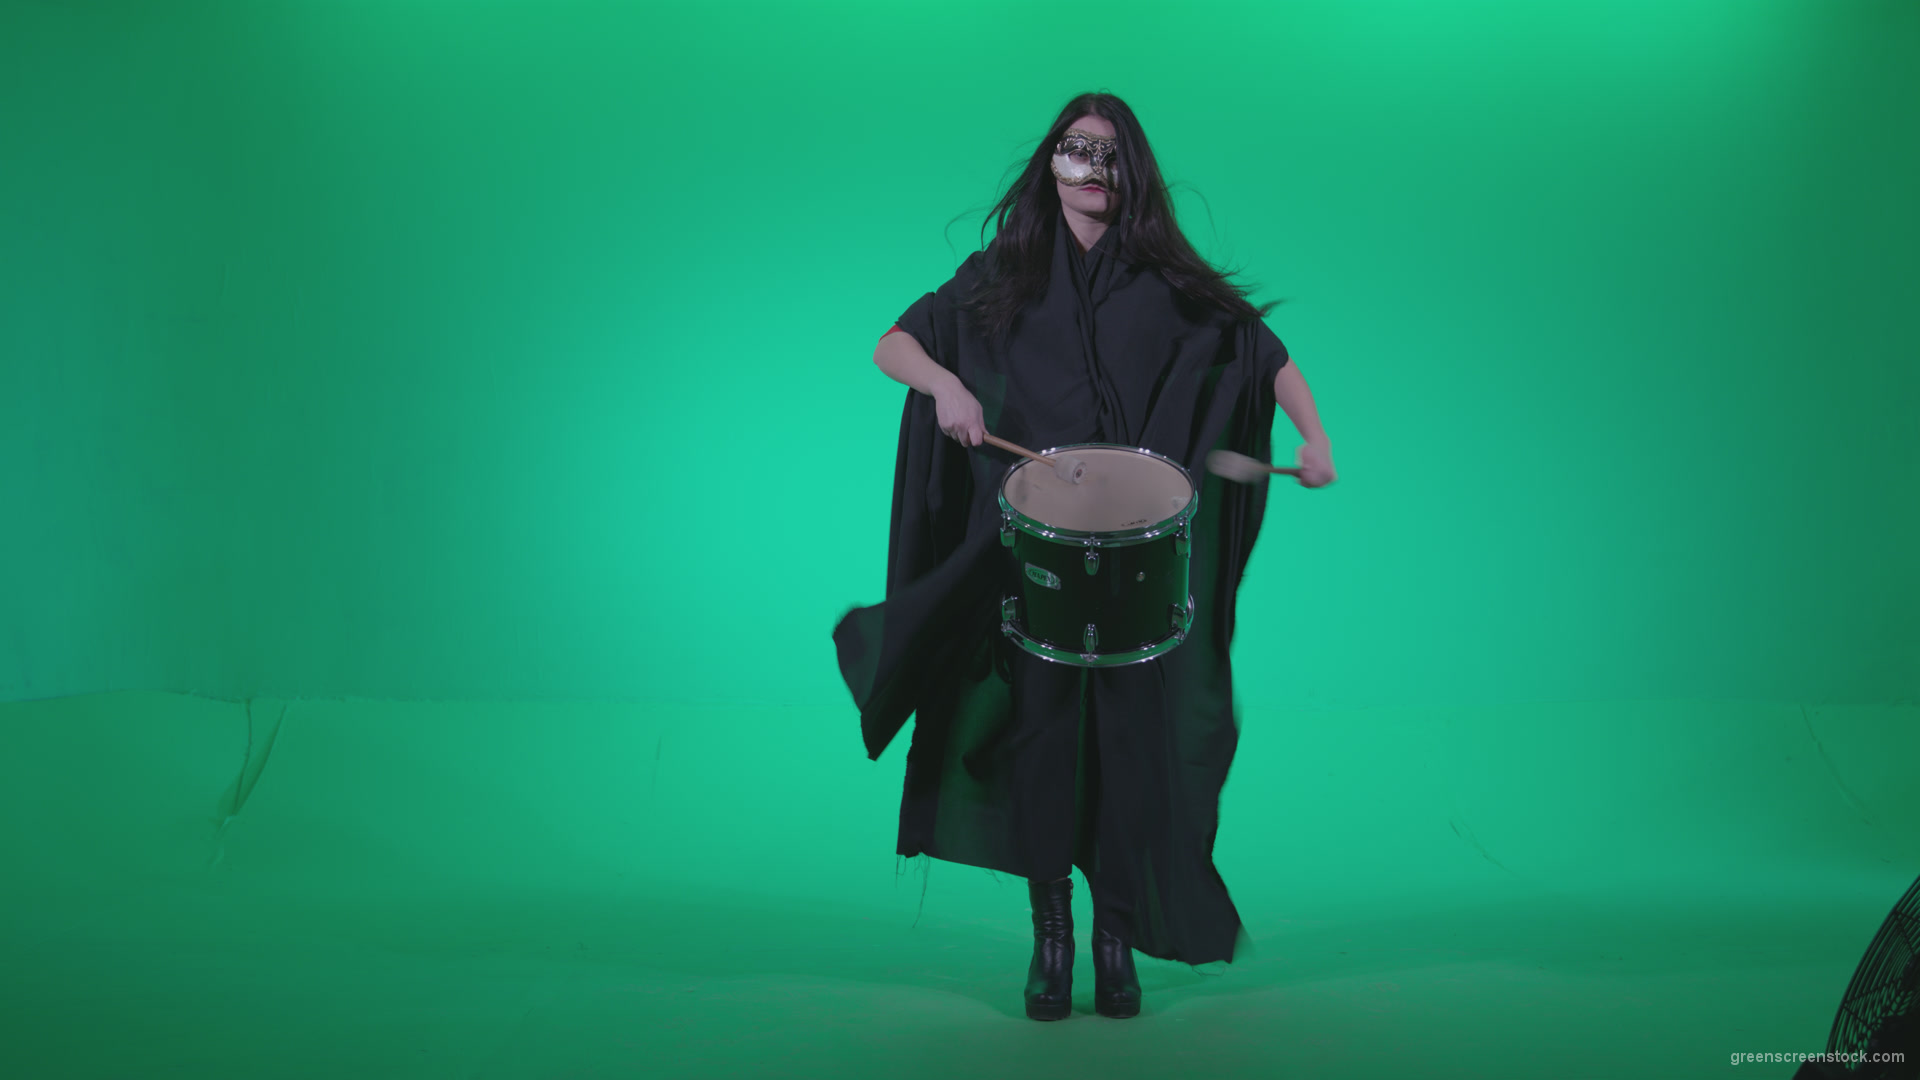 Gothic-Snare-Drumming-girl-g4_009 Green Screen Stock